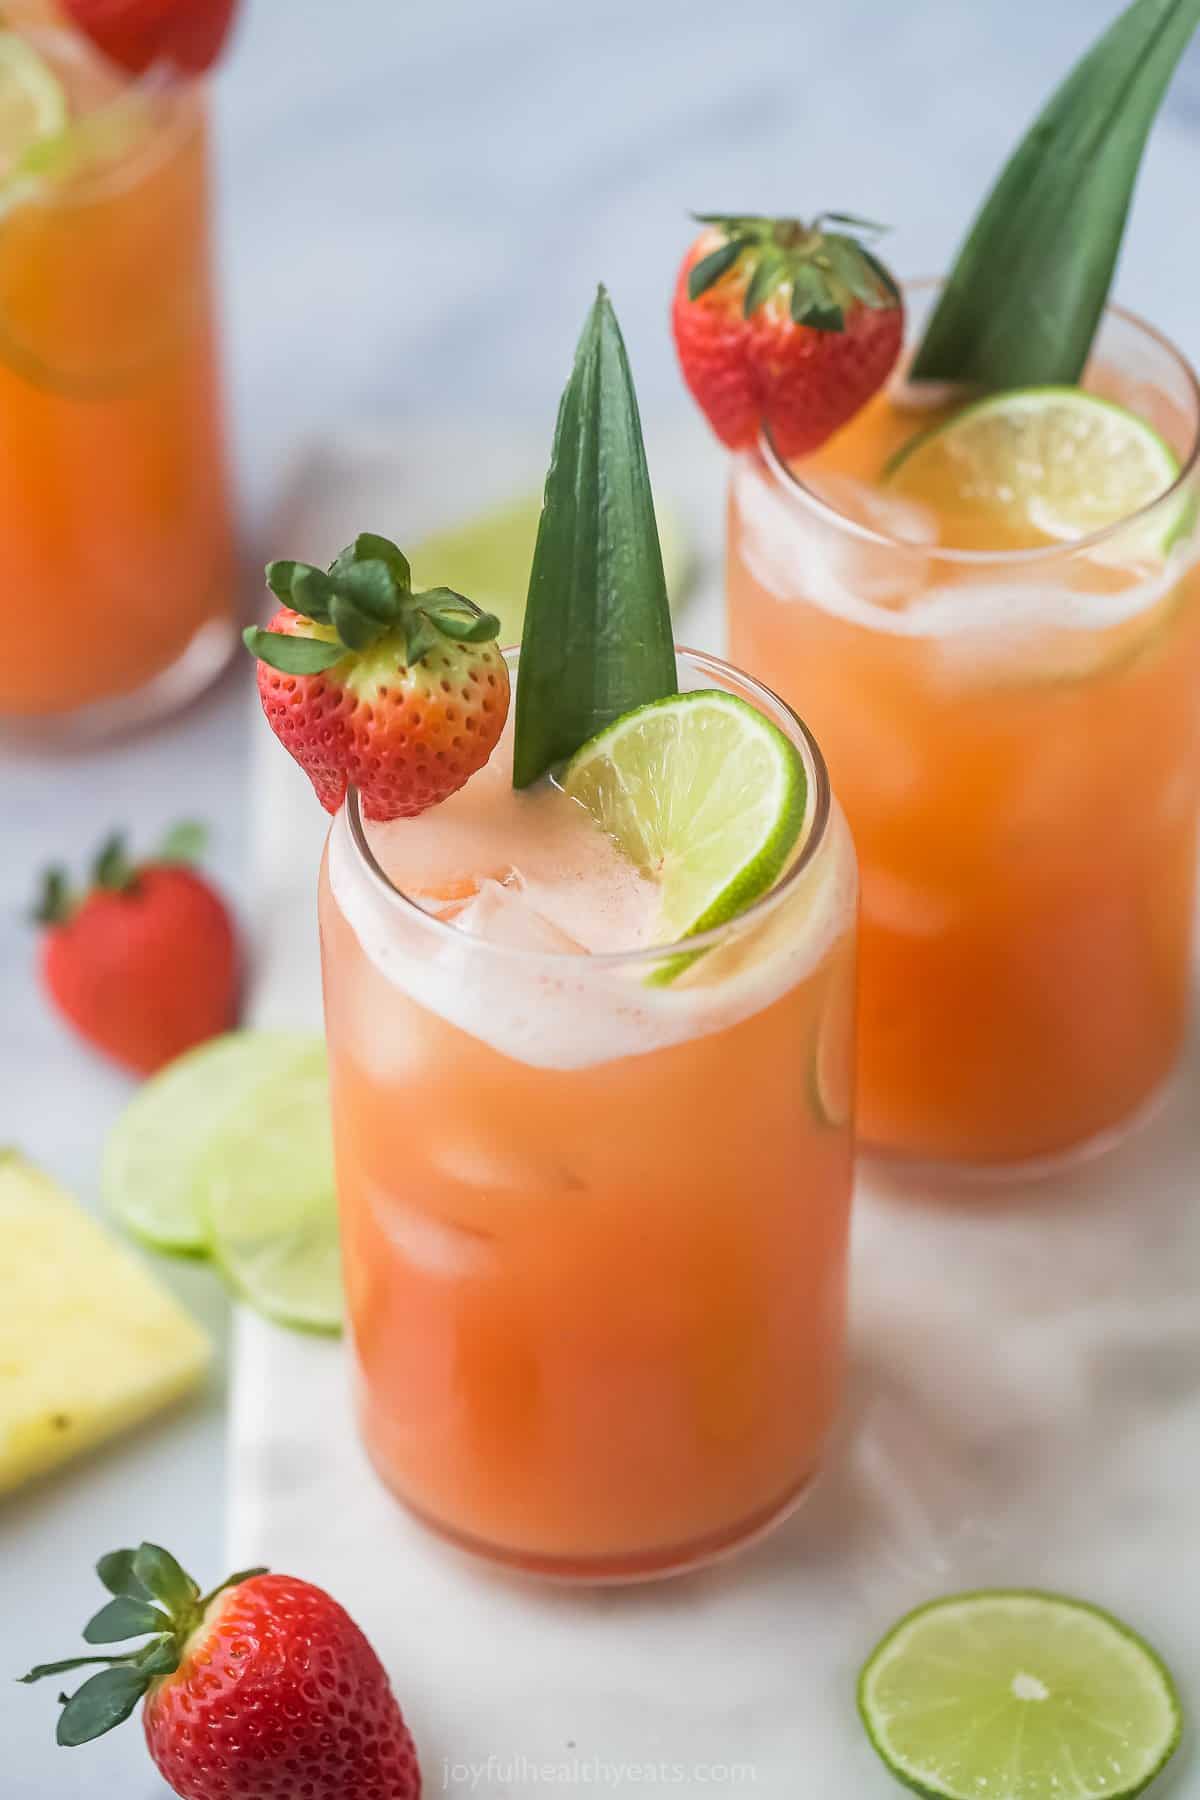 Overhead view of glasses of pineapple strawberry agua fresca